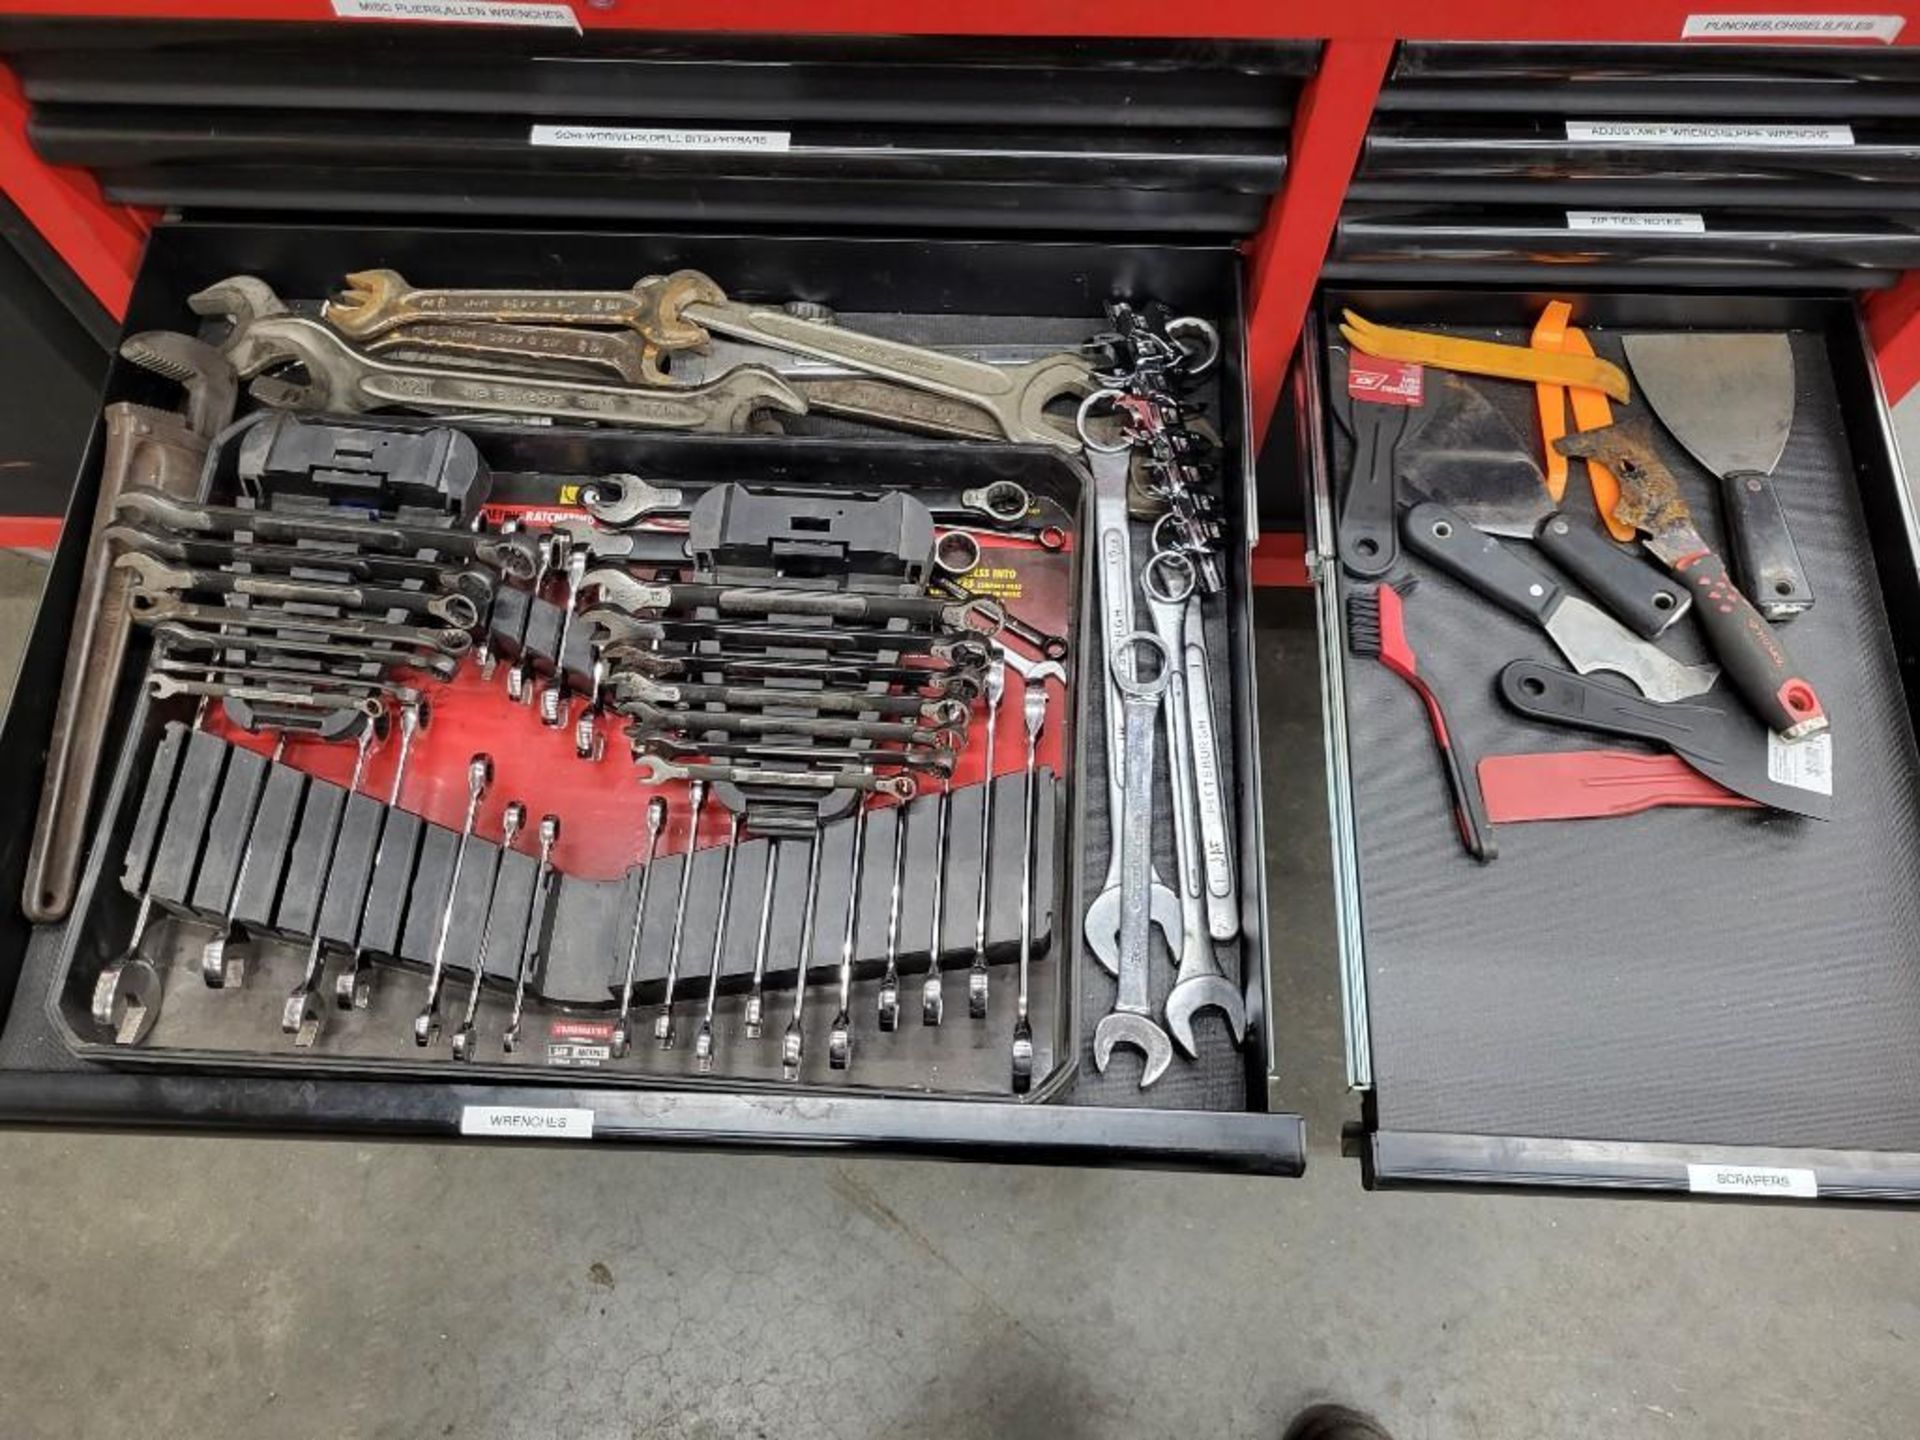 MILWAUKEE 60" MOBILE WORKBENCH LOADED WITH TOOLS - Image 14 of 18